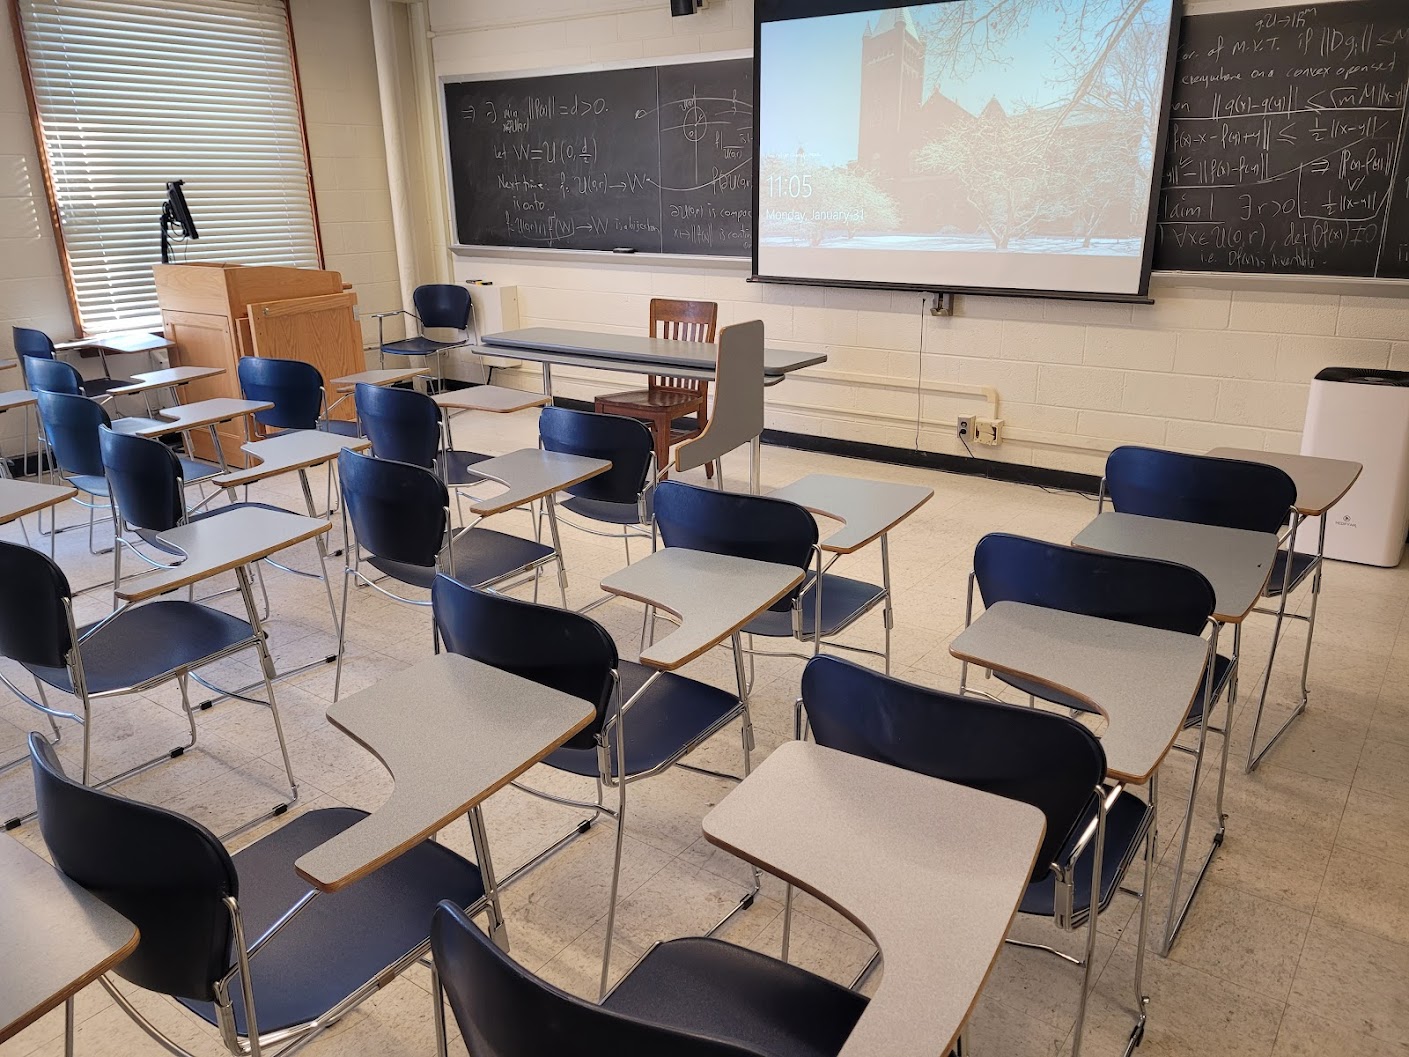 This is a view of the classroom with moveable tableted arm chairs, chalkboard, and instructor table in front.